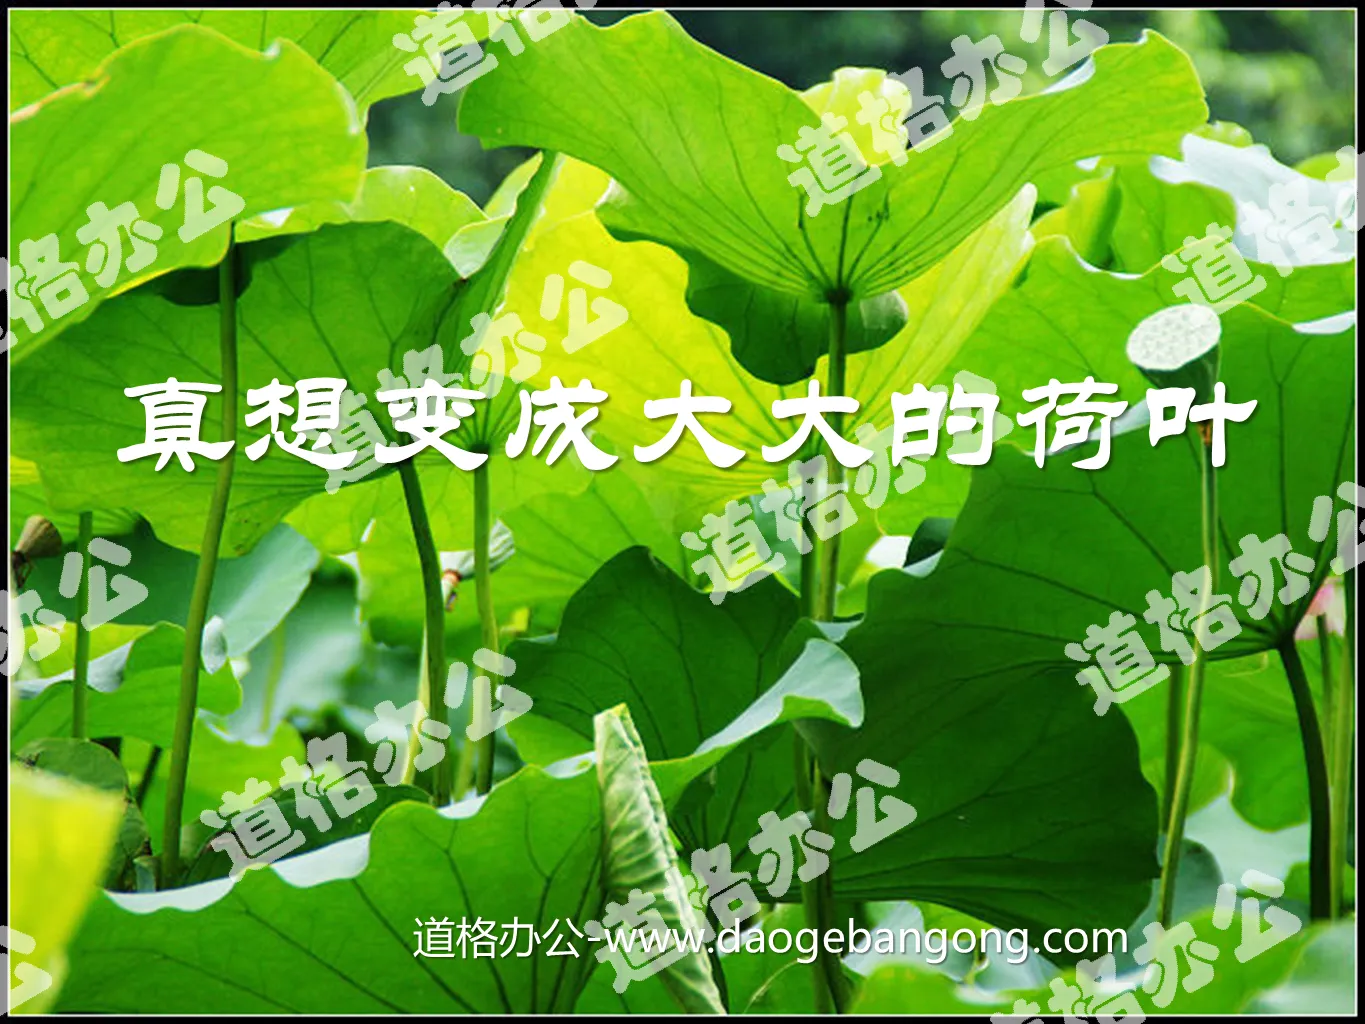 "I really want to become a big lotus leaf" PPT courseware 4